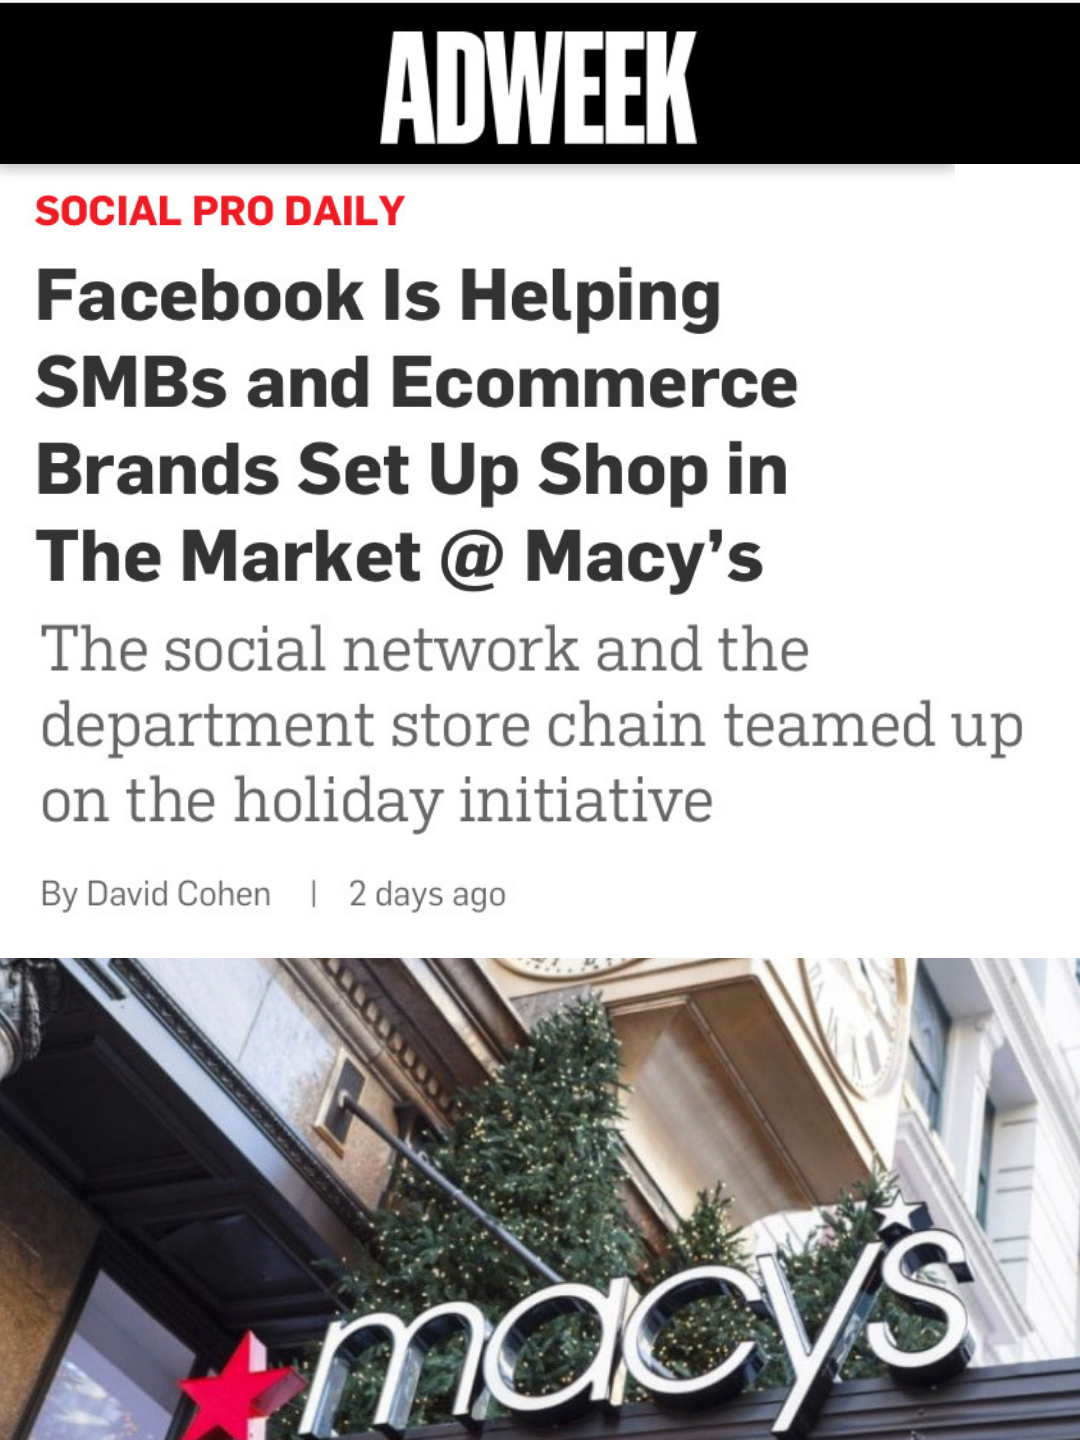 Facebook Is Helping SMBs and Ecommerce Brands Set Up Shop in The Market @ Macy’s